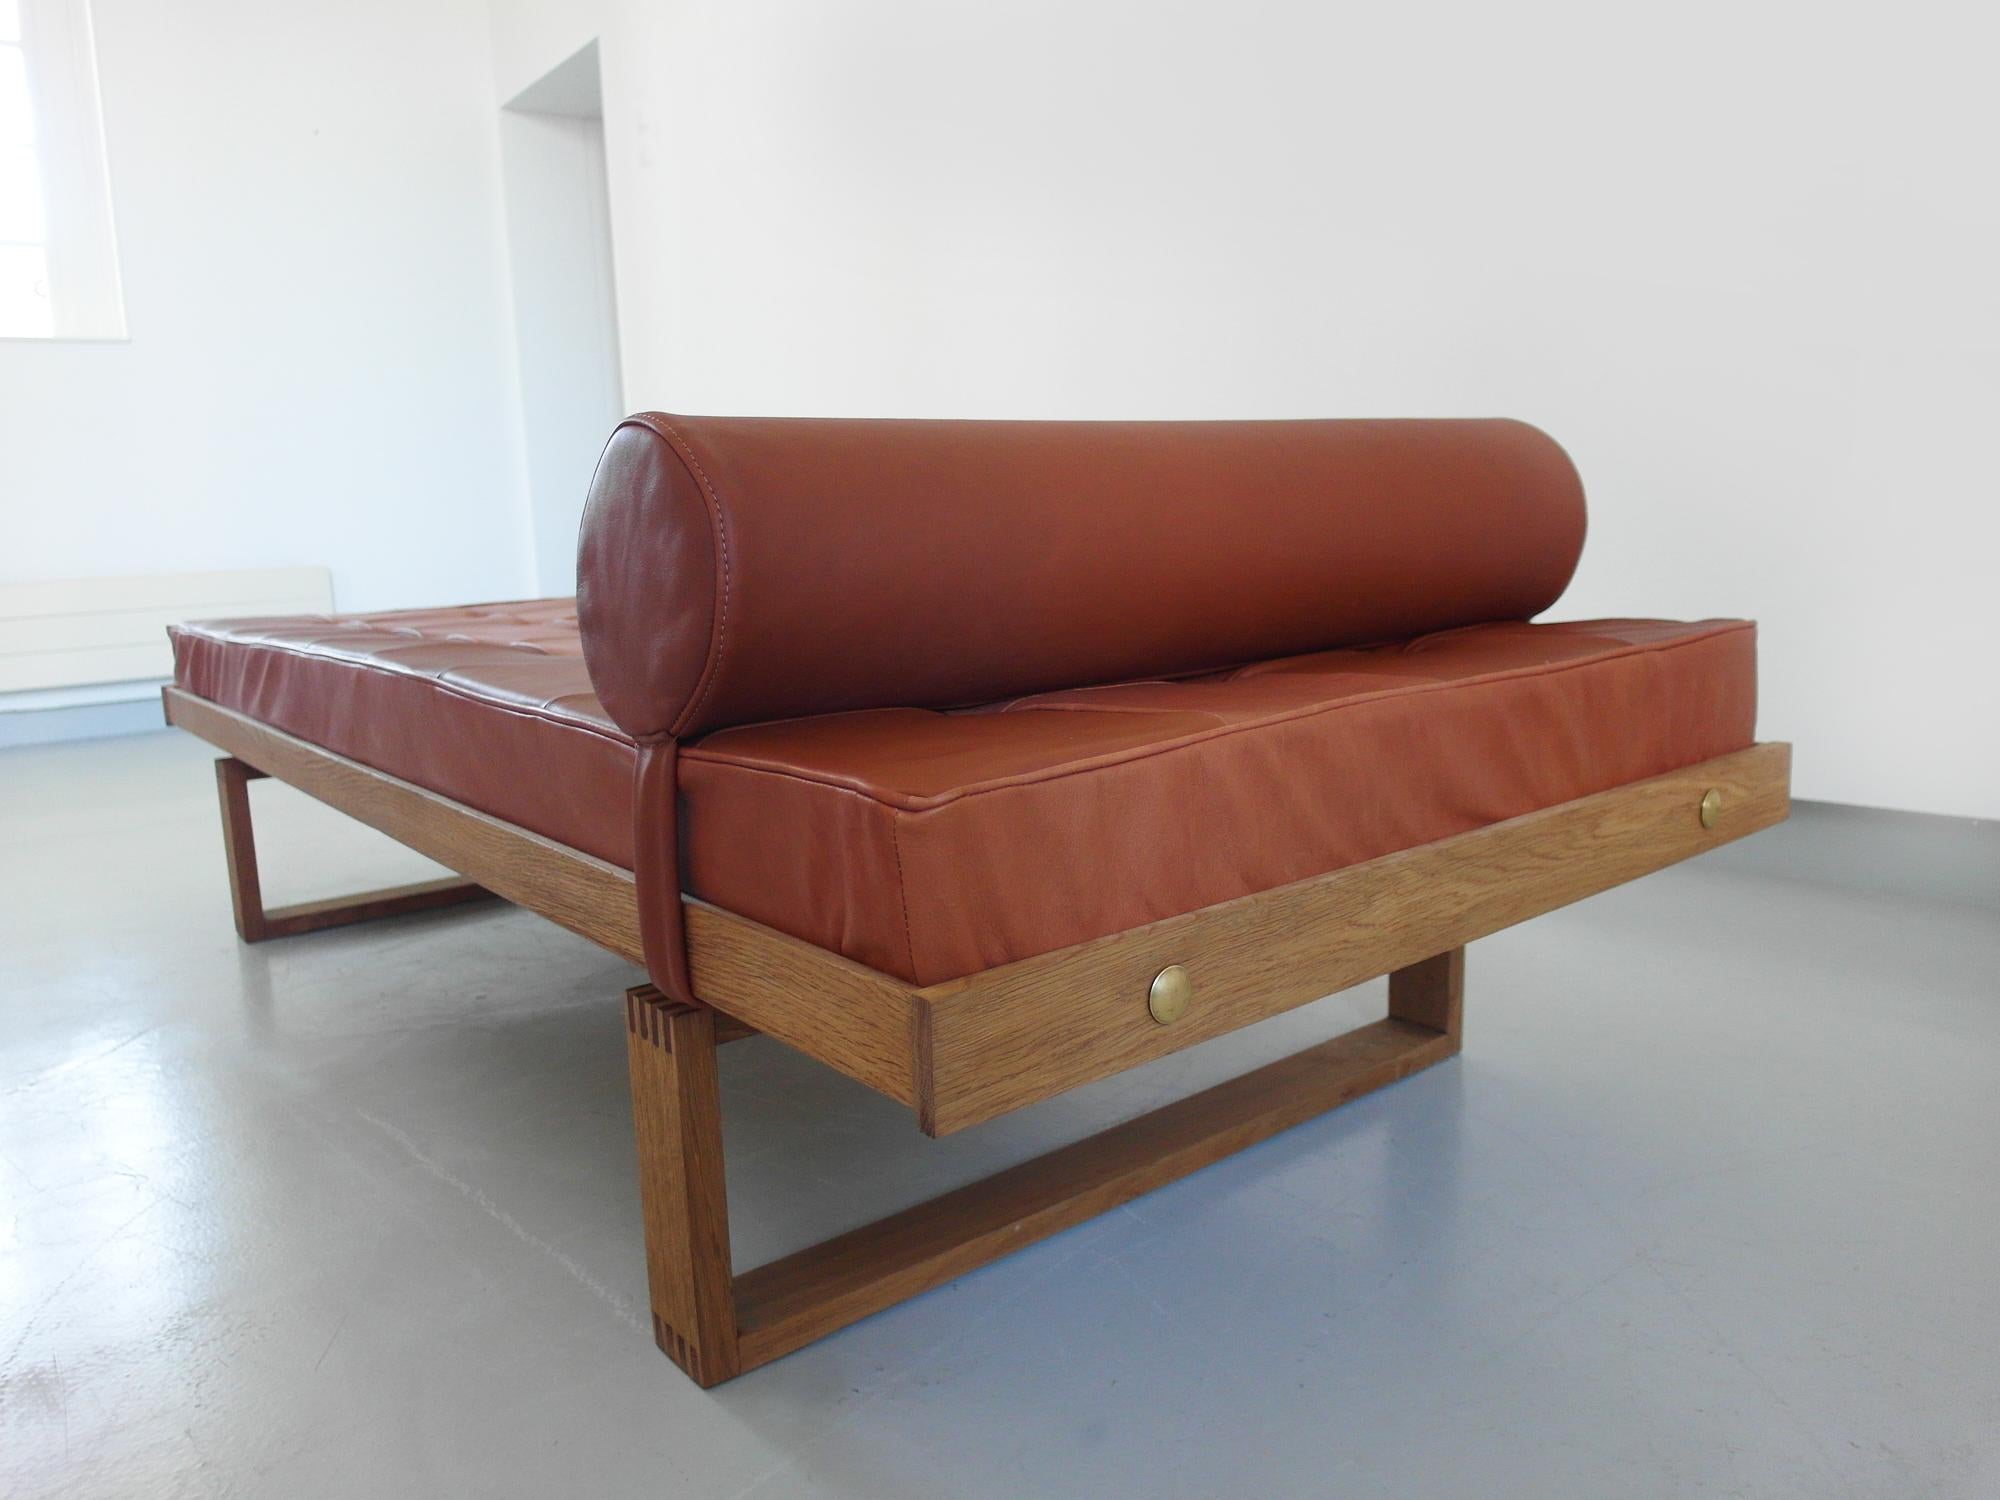 Mid-Century Modern Børge Mogensen Daybed in Oak and Leather for Fredericia, Denmark, 1962